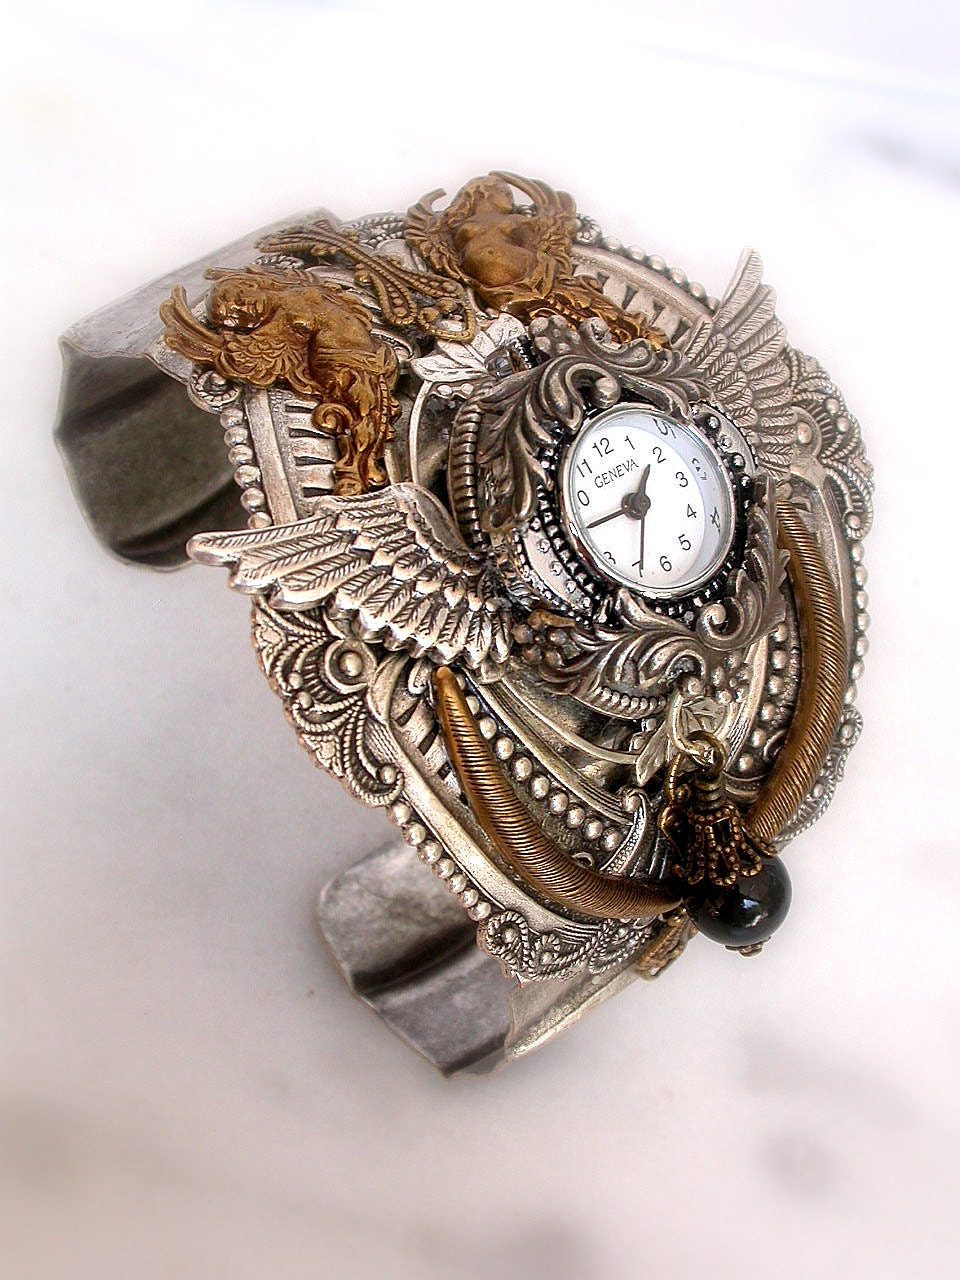 Valkyries and Goddesses - Gothic Steampunk Cuff Watch in Silver and Brass